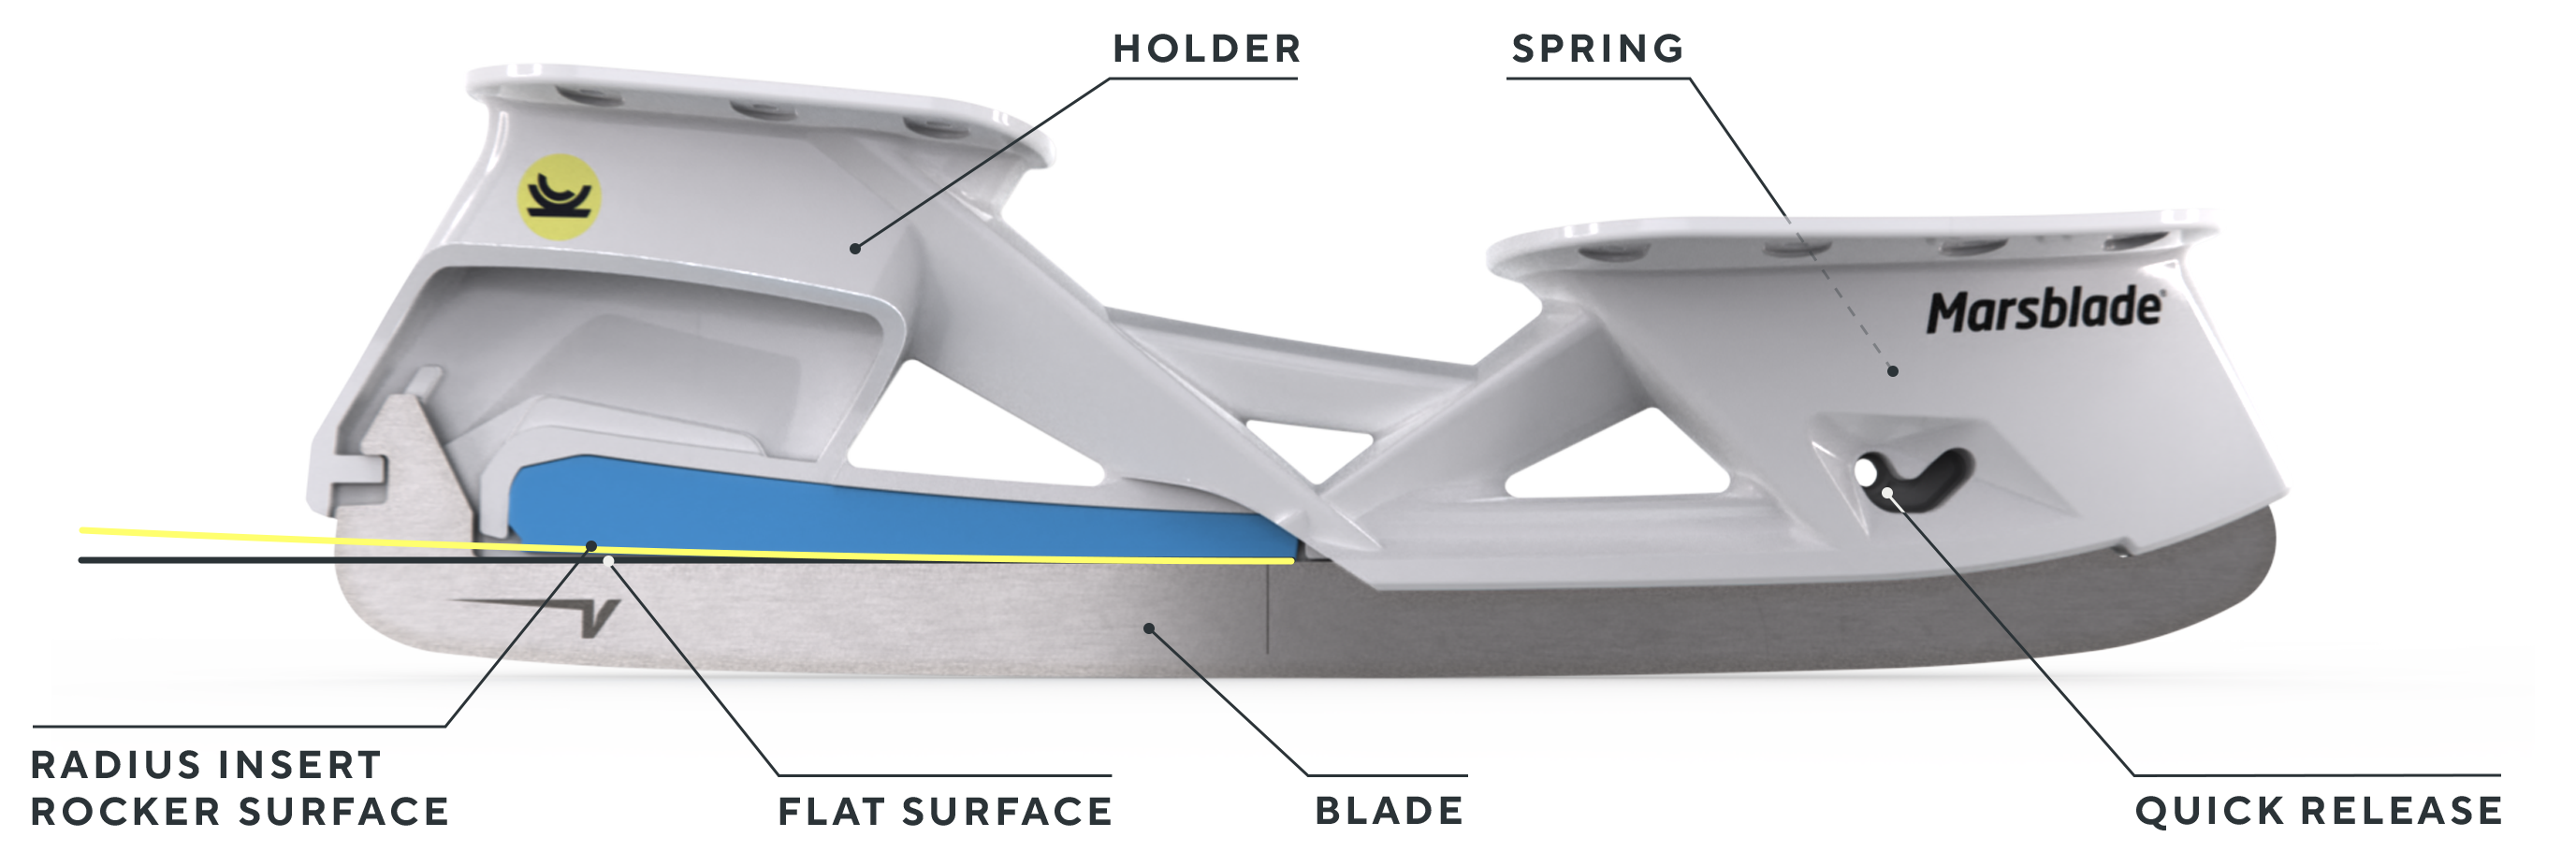 Section view of the Marsblade I2